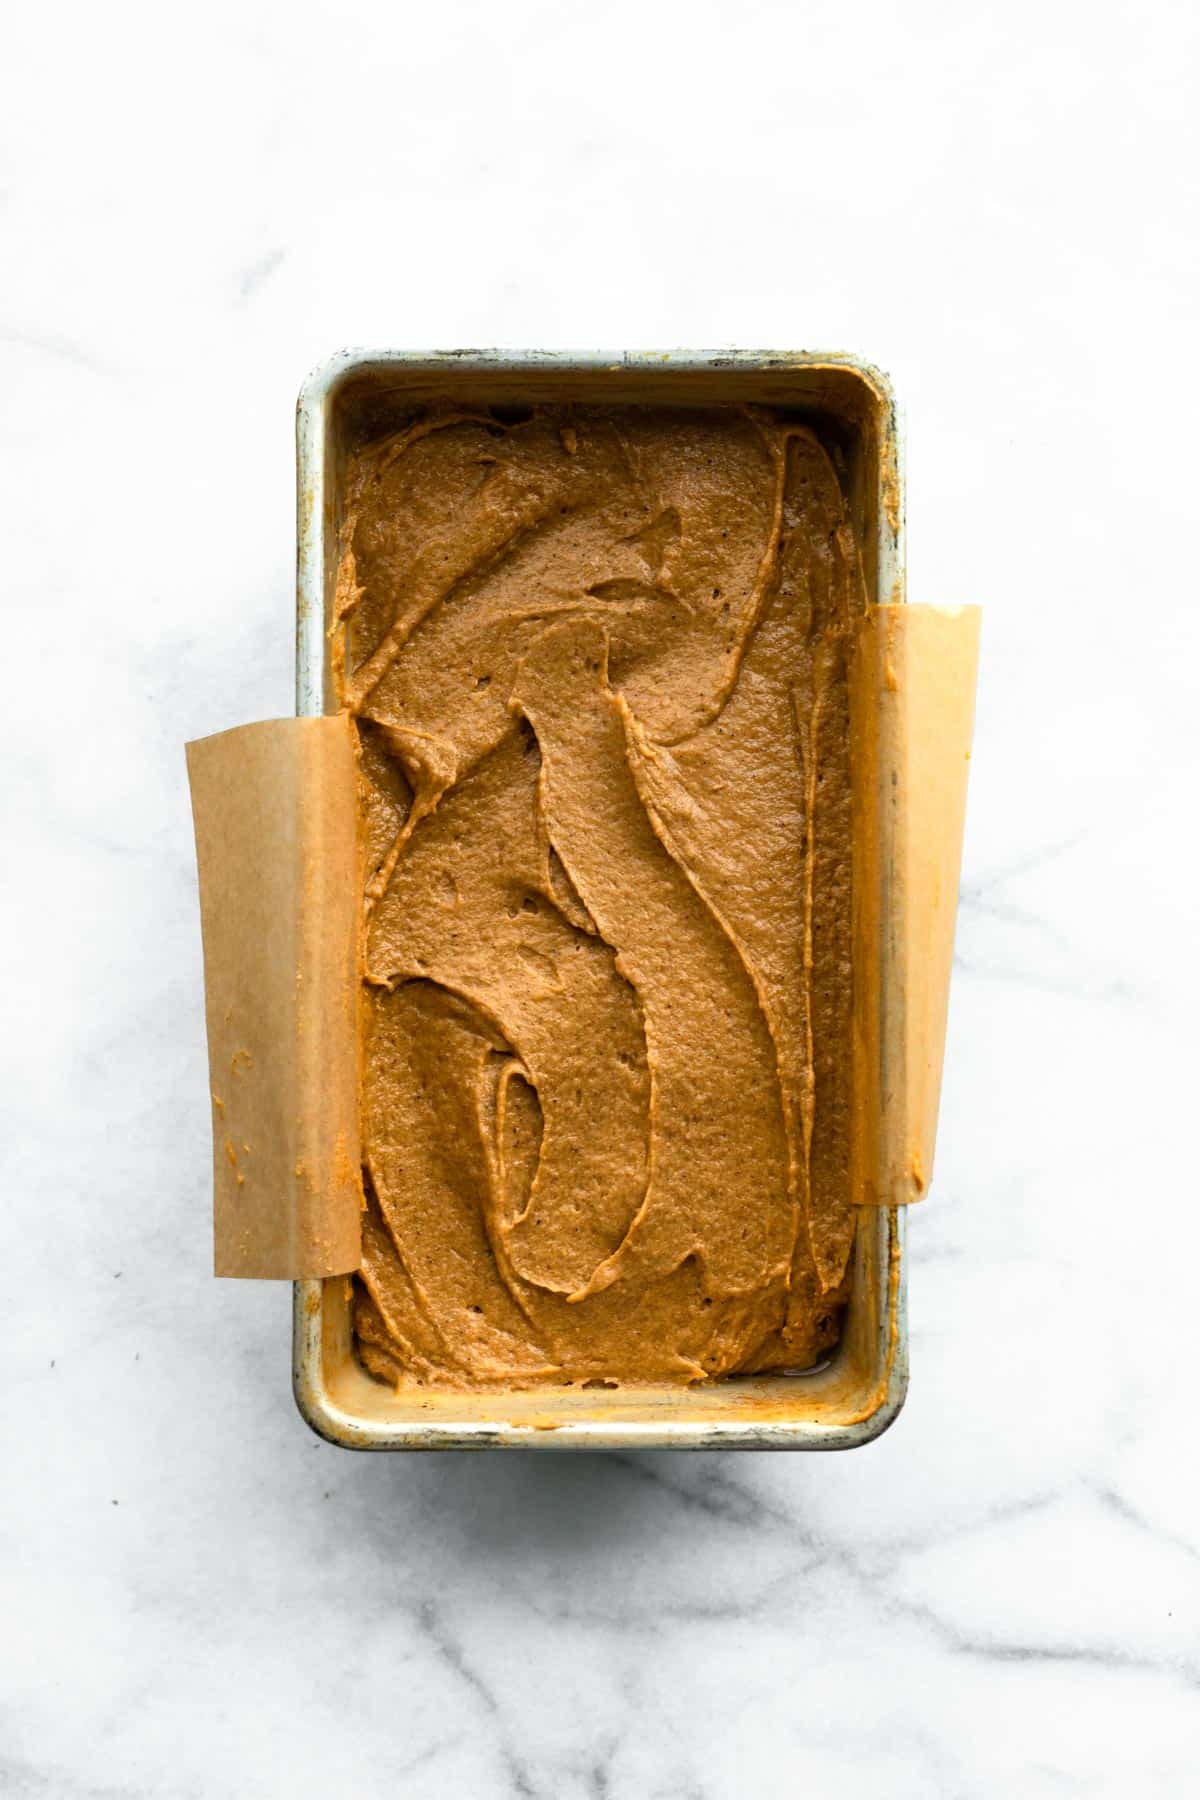 Overhead photo of gluten free gingerbread batter in a metal loaf pan.